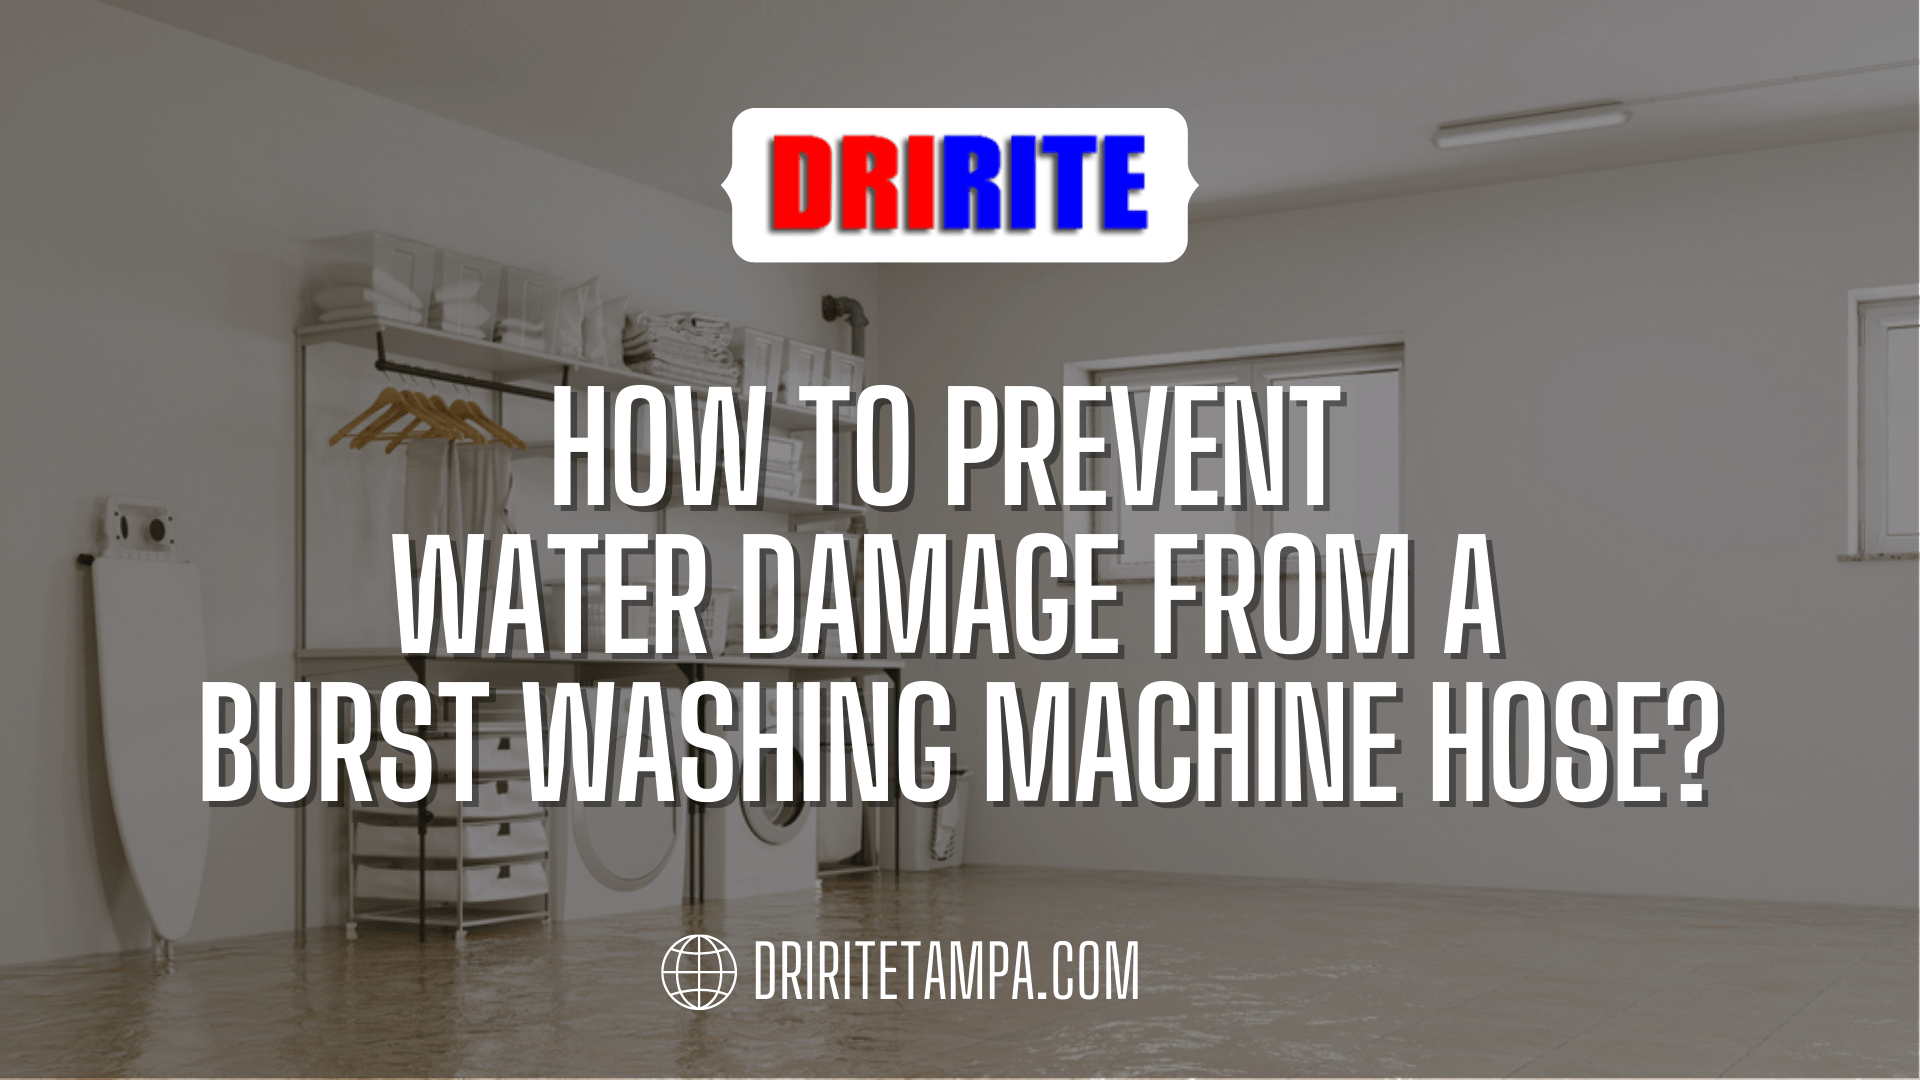 How To Prevent Water Damage From a Burst Washing Machine Hose